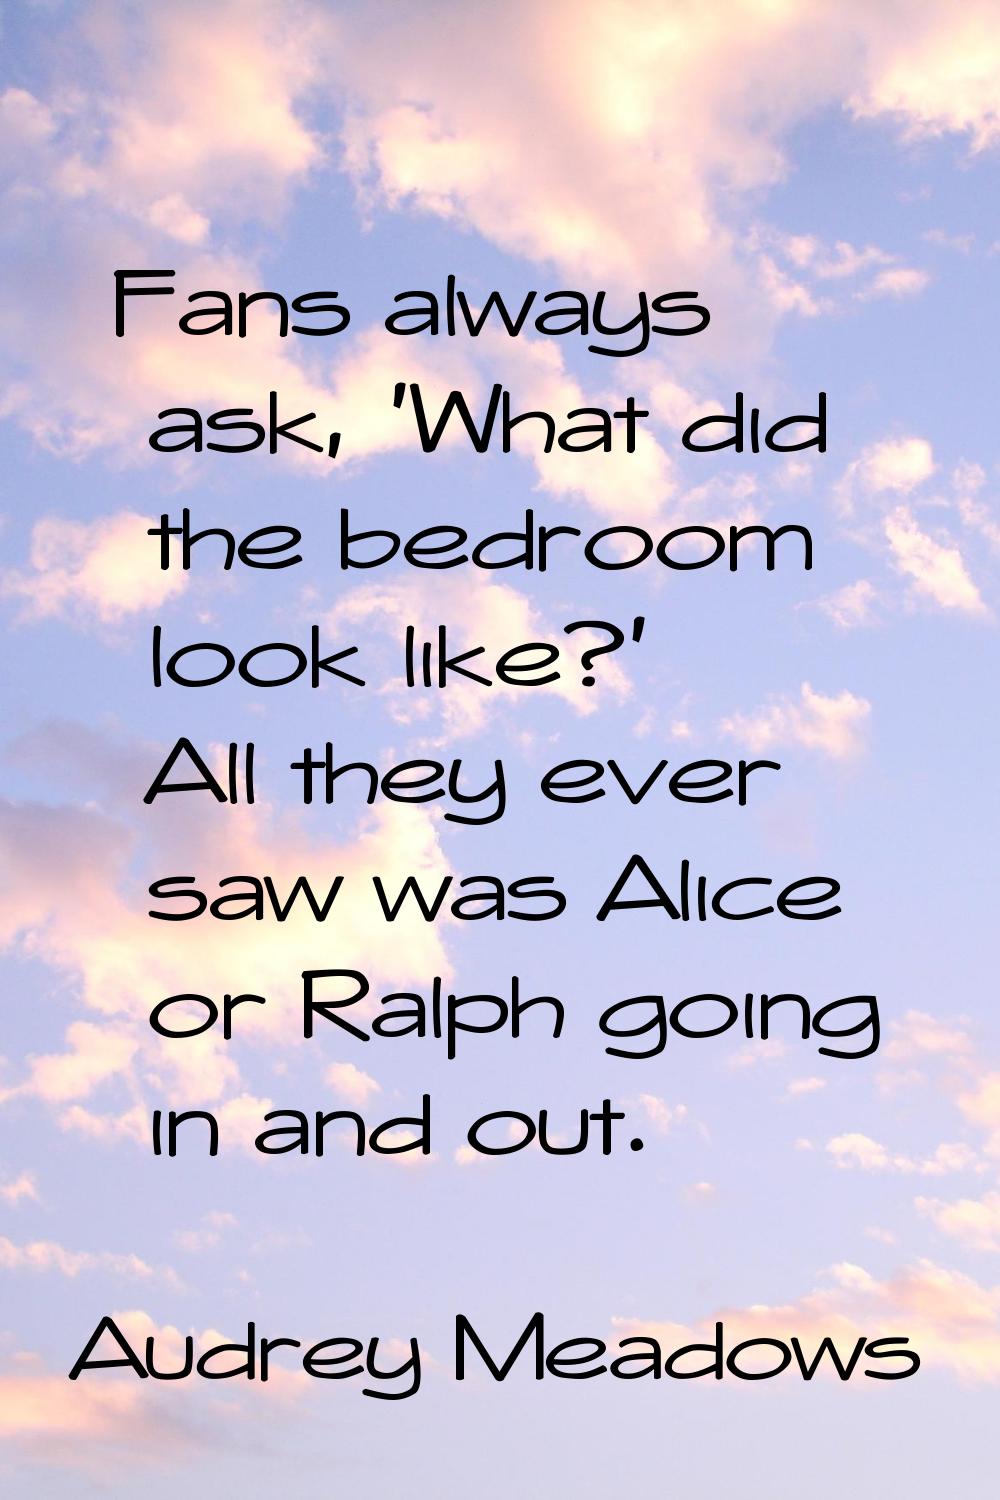 Fans always ask, 'What did the bedroom look like?' All they ever saw was Alice or Ralph going in an